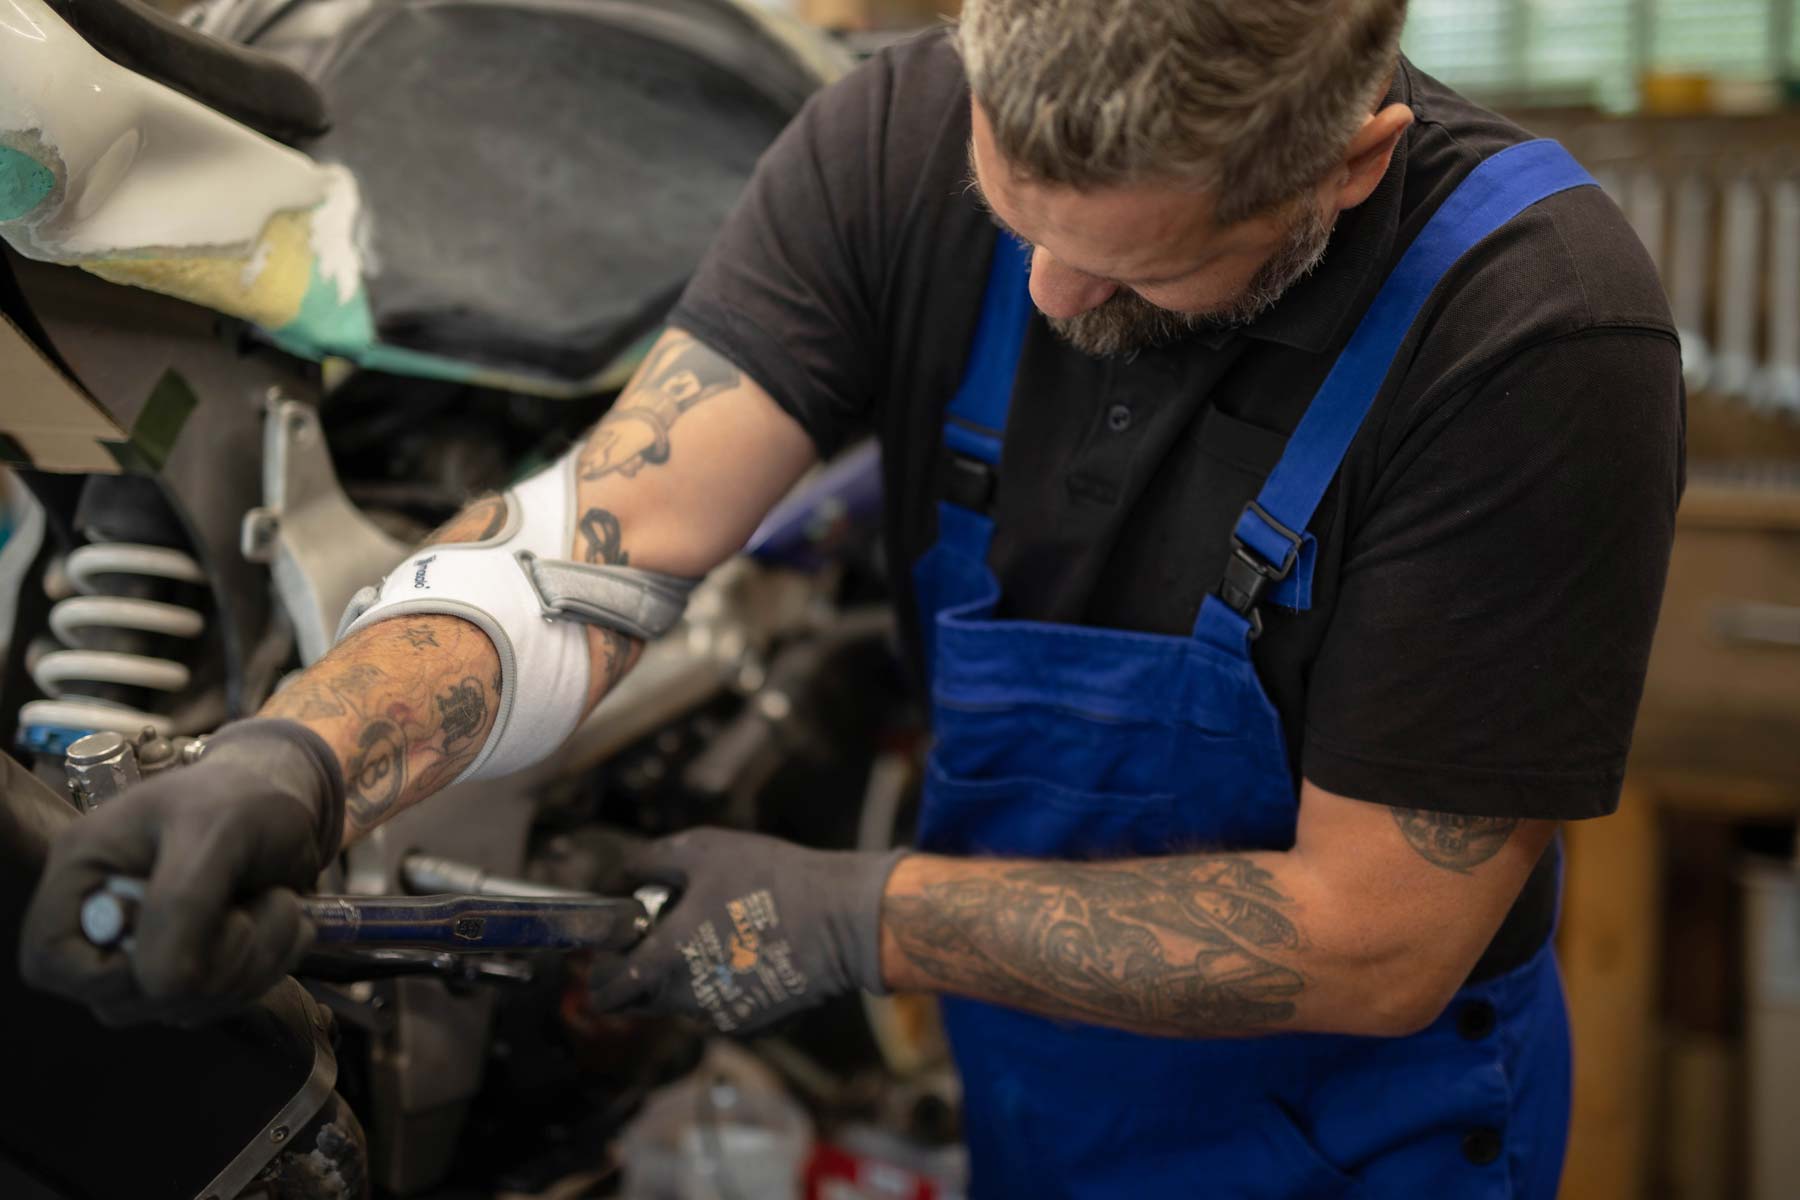 Mechanic repairs motorcycle and wears blue overalls and Masalo cuff against tennis elbow